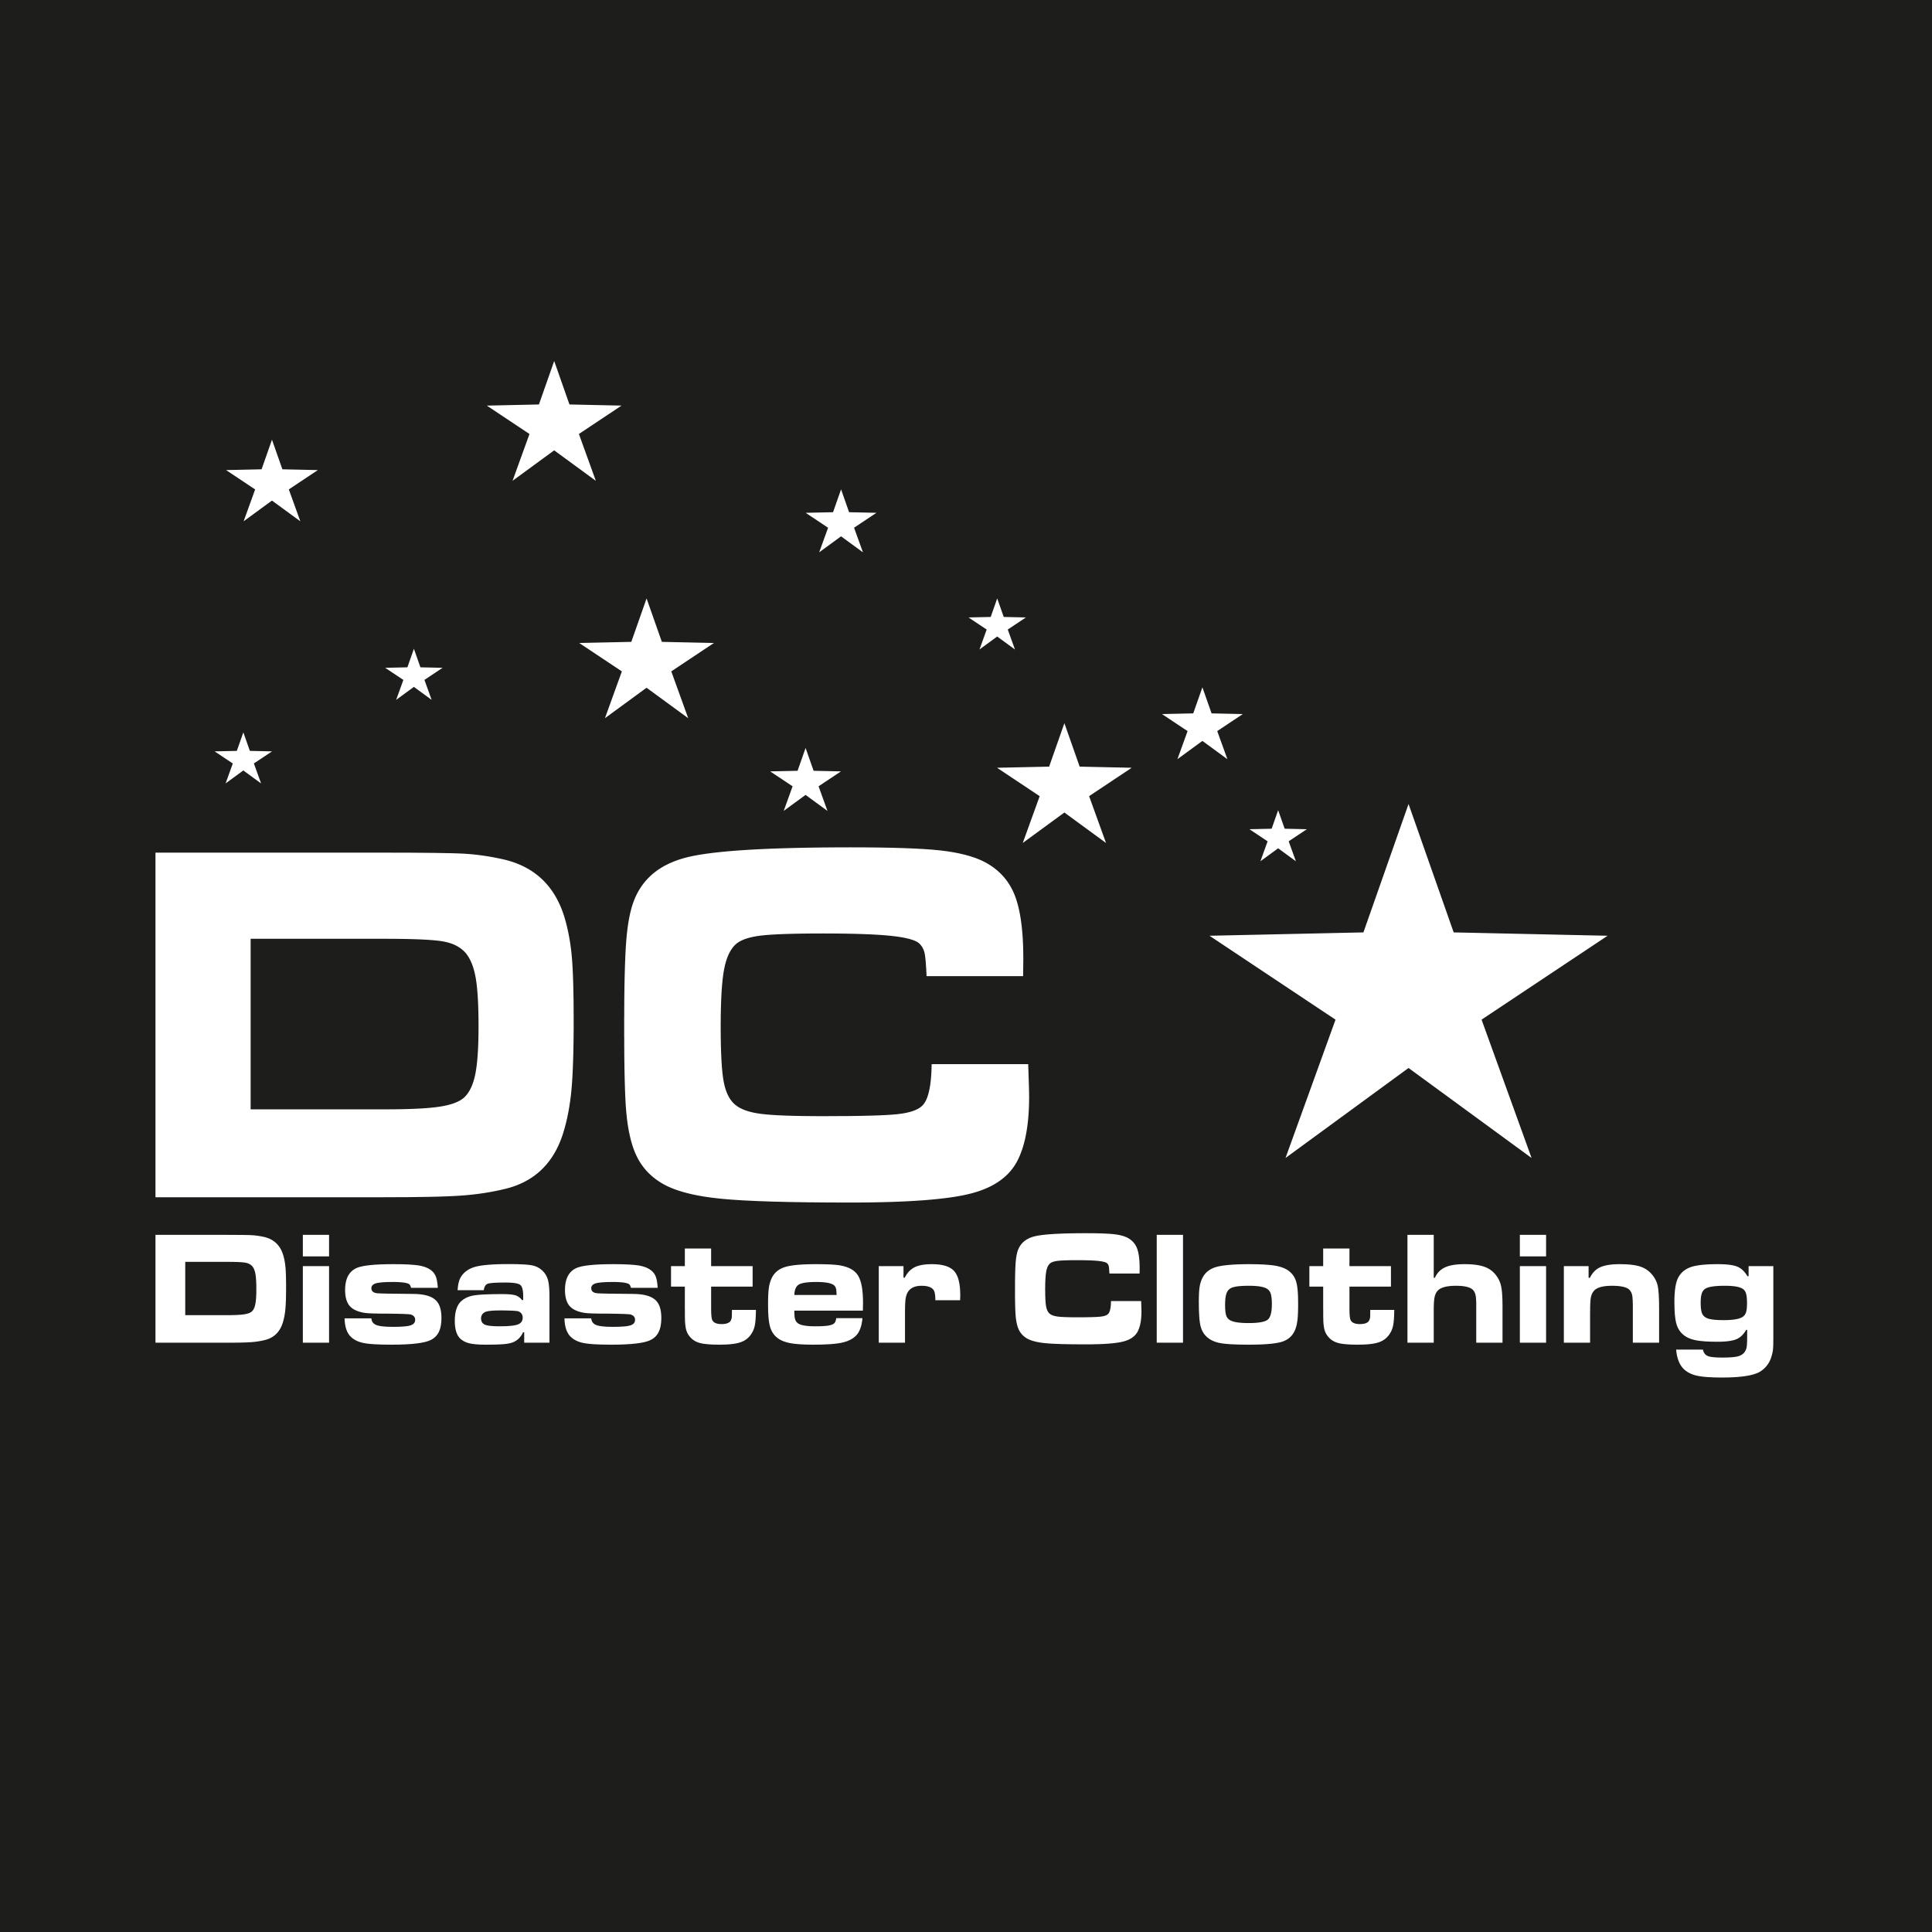 Disaster Clothing